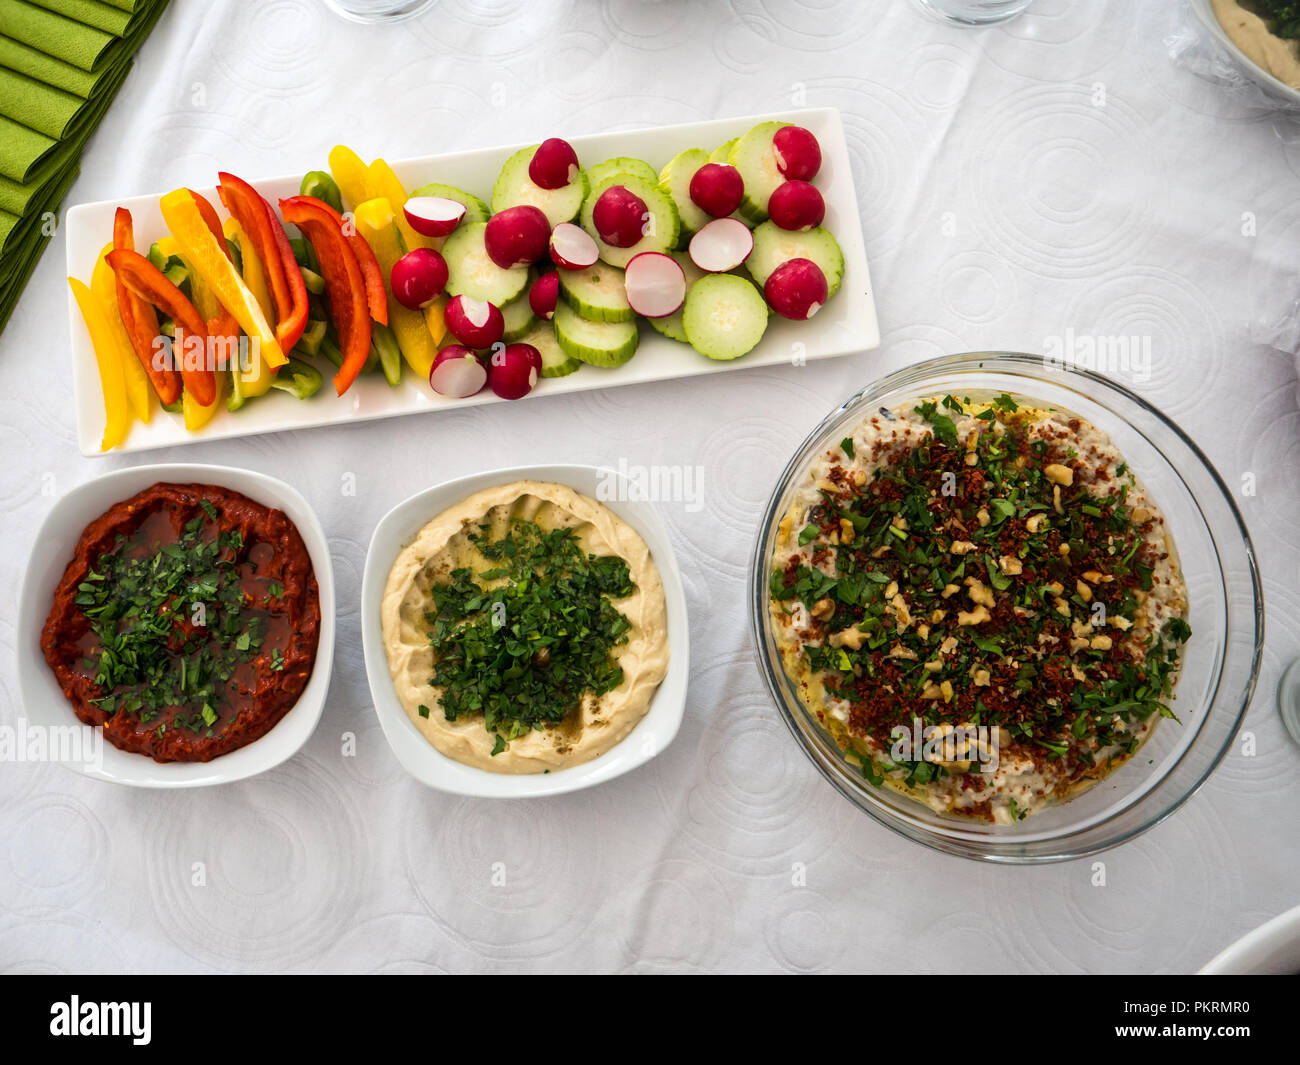 A mix of arabic food together with fresh vegetables Stock Photo